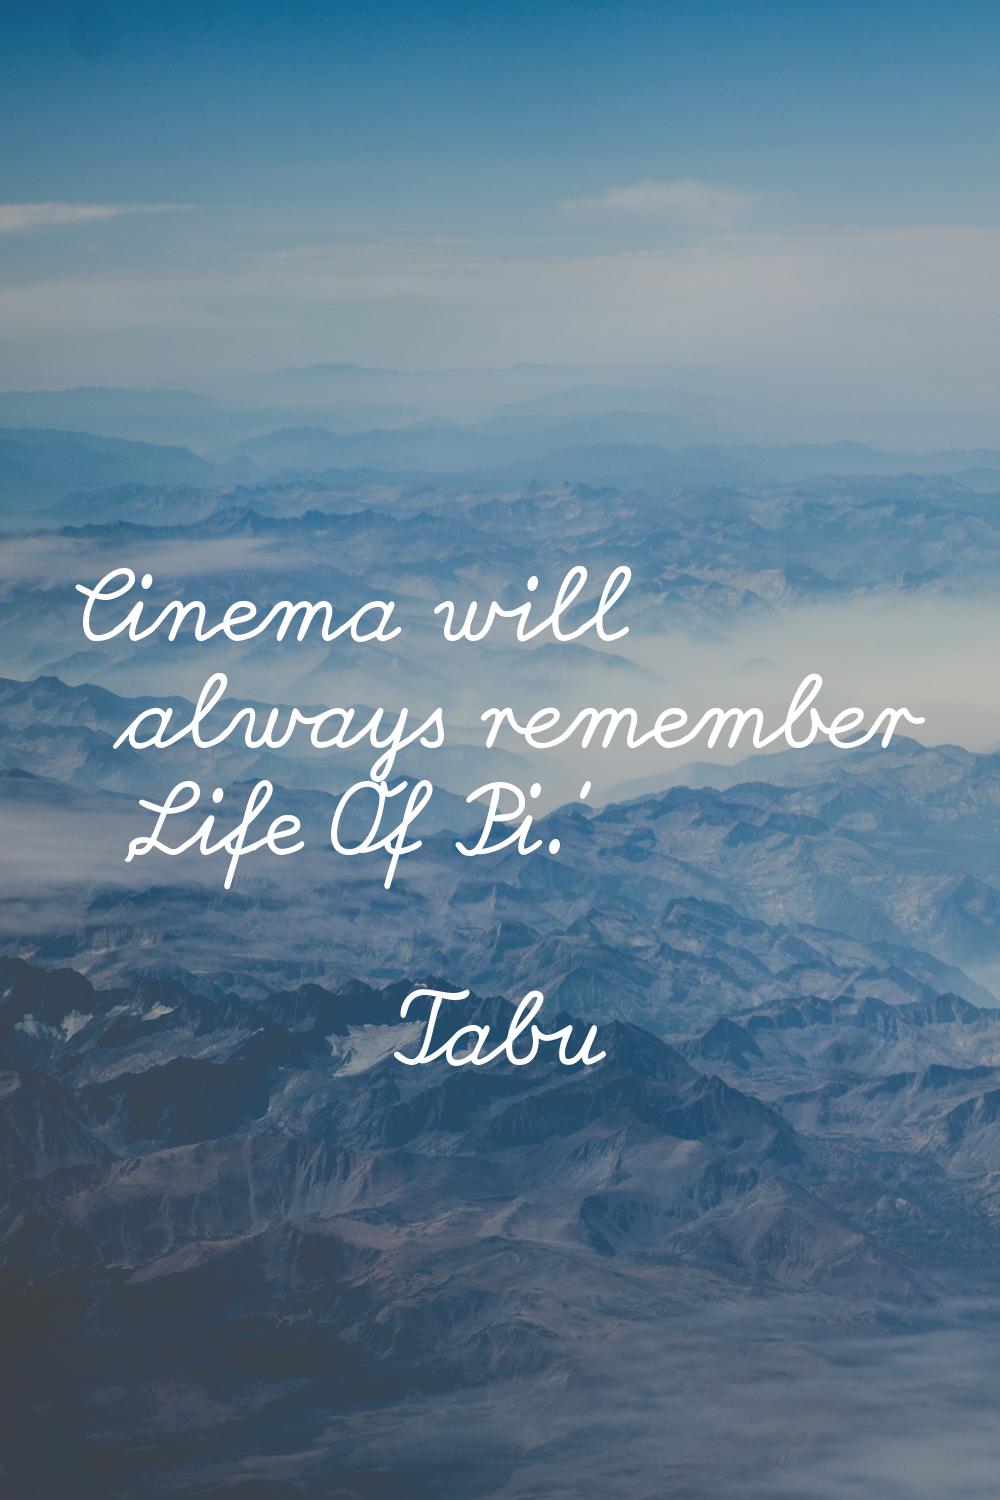 Cinema will always remember 'Life Of Pi.'